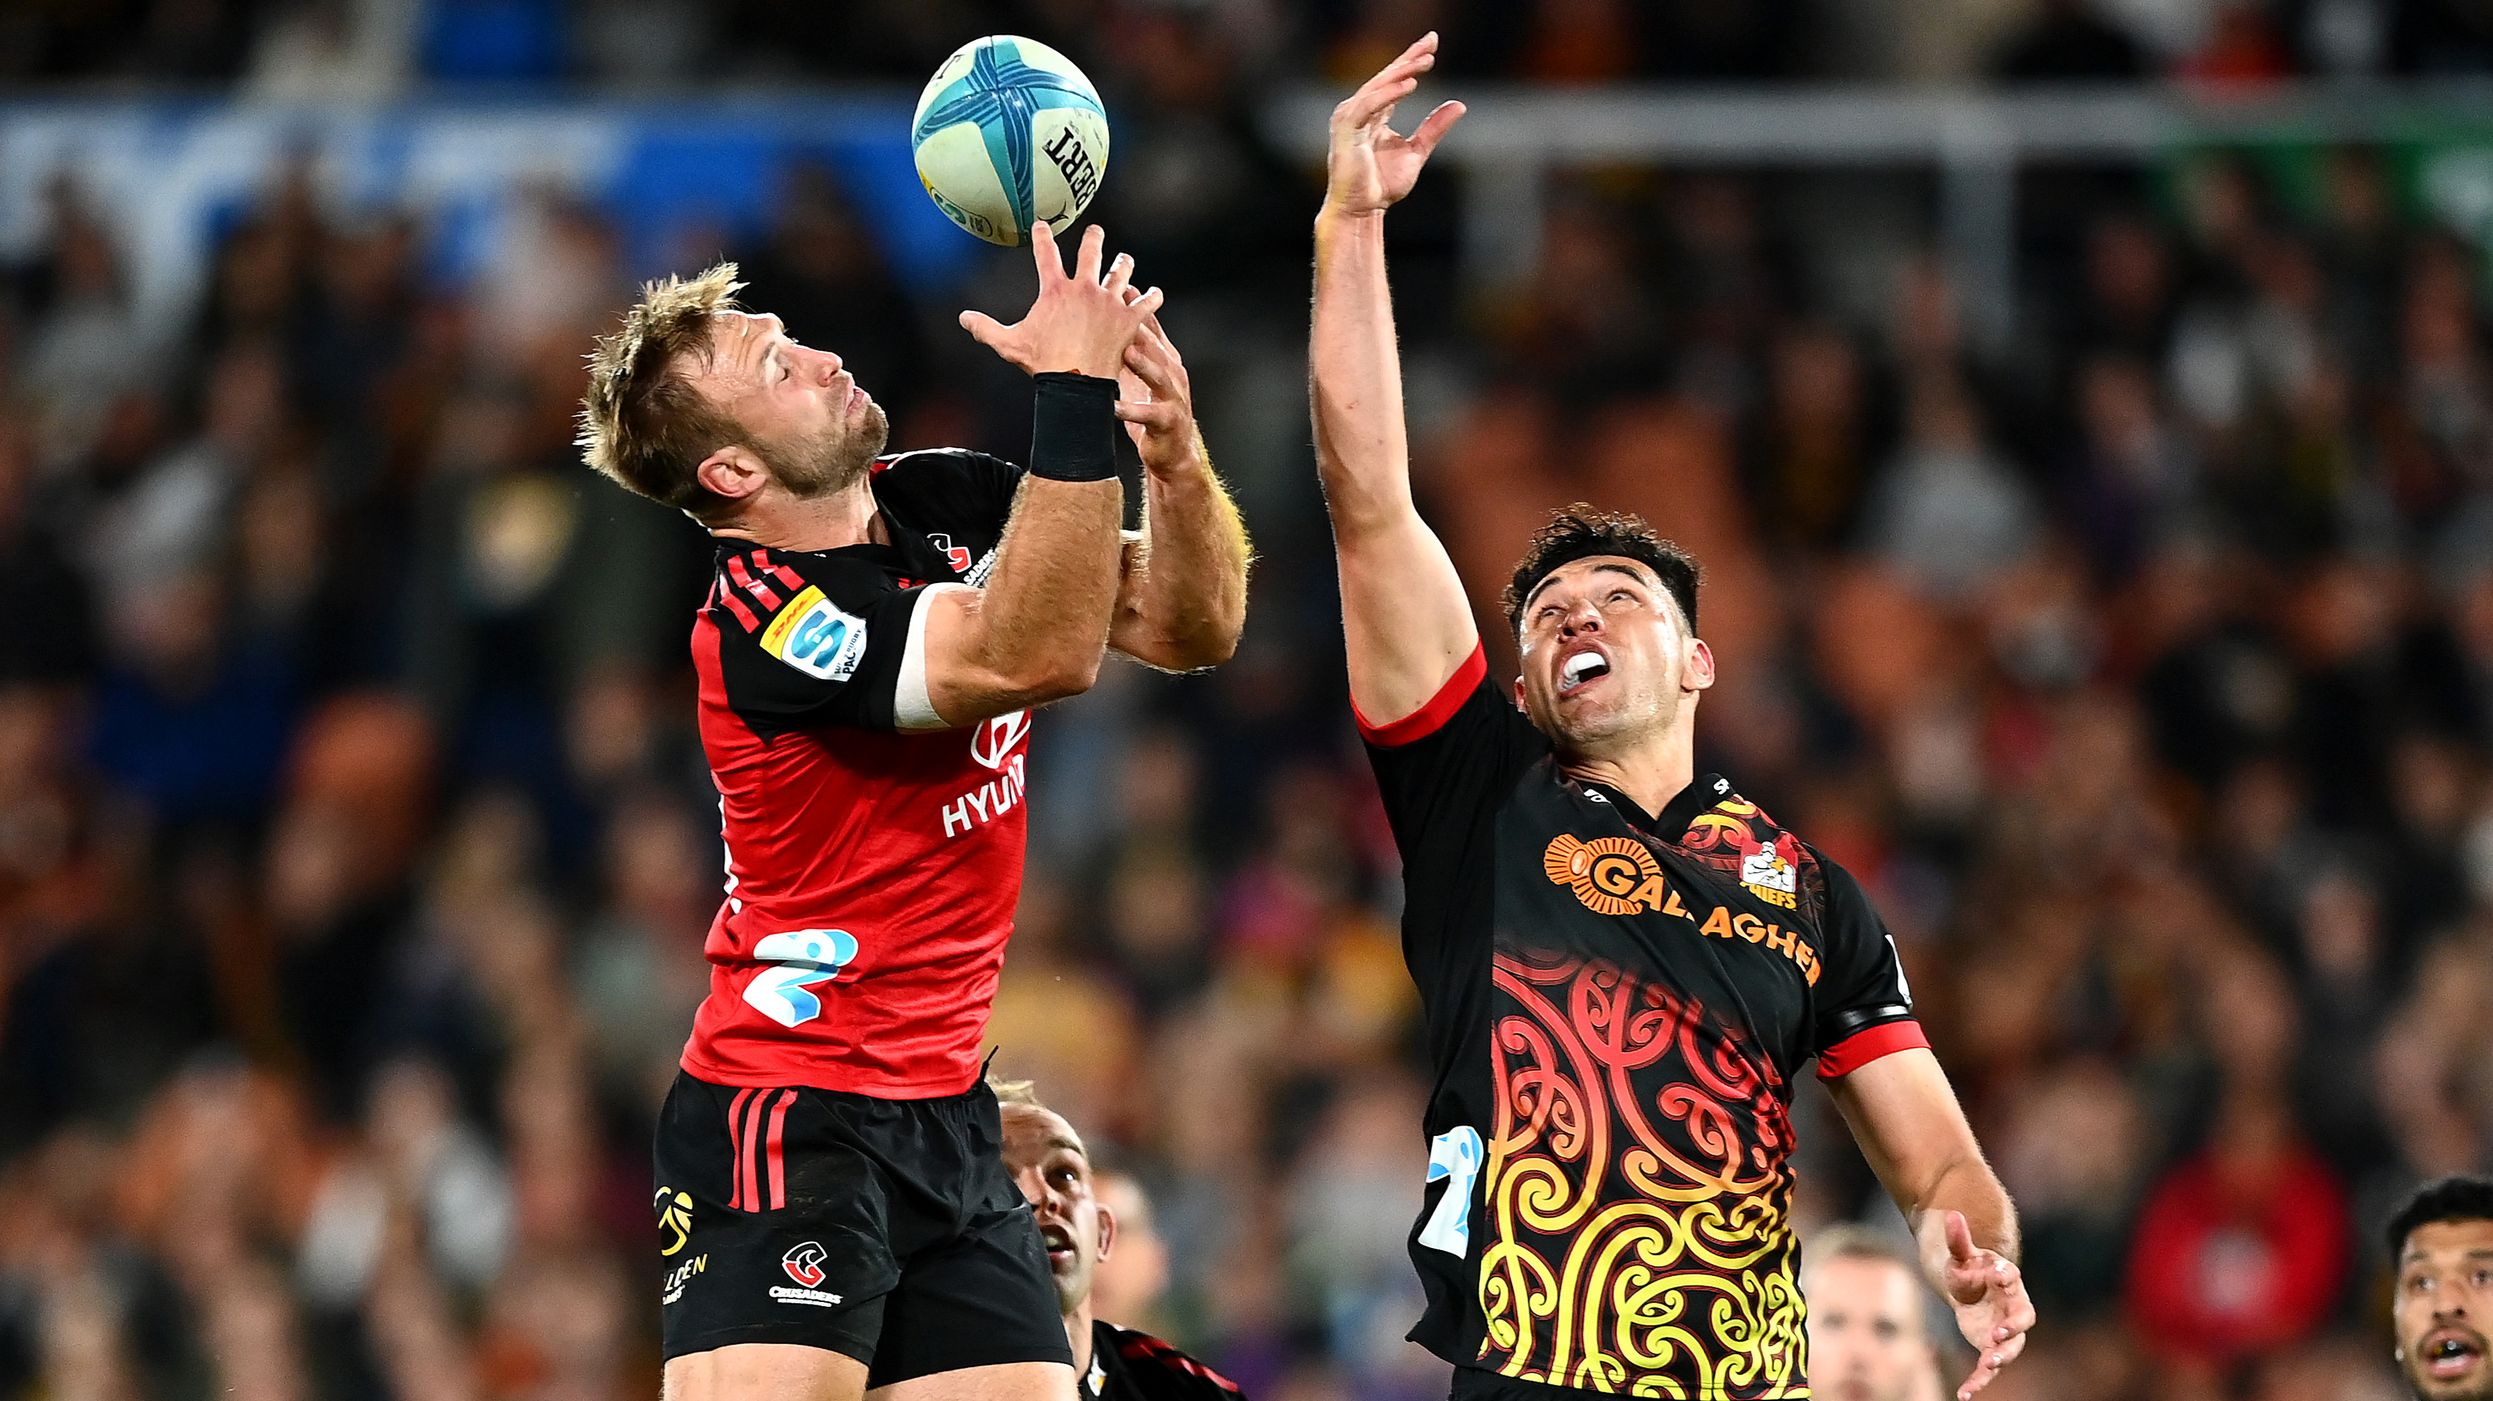 Braydon Ennor of the Crusaders and Shaun Stevenson of the Chiefs compete for the ball during round 10 of Super Rugby Pacific.